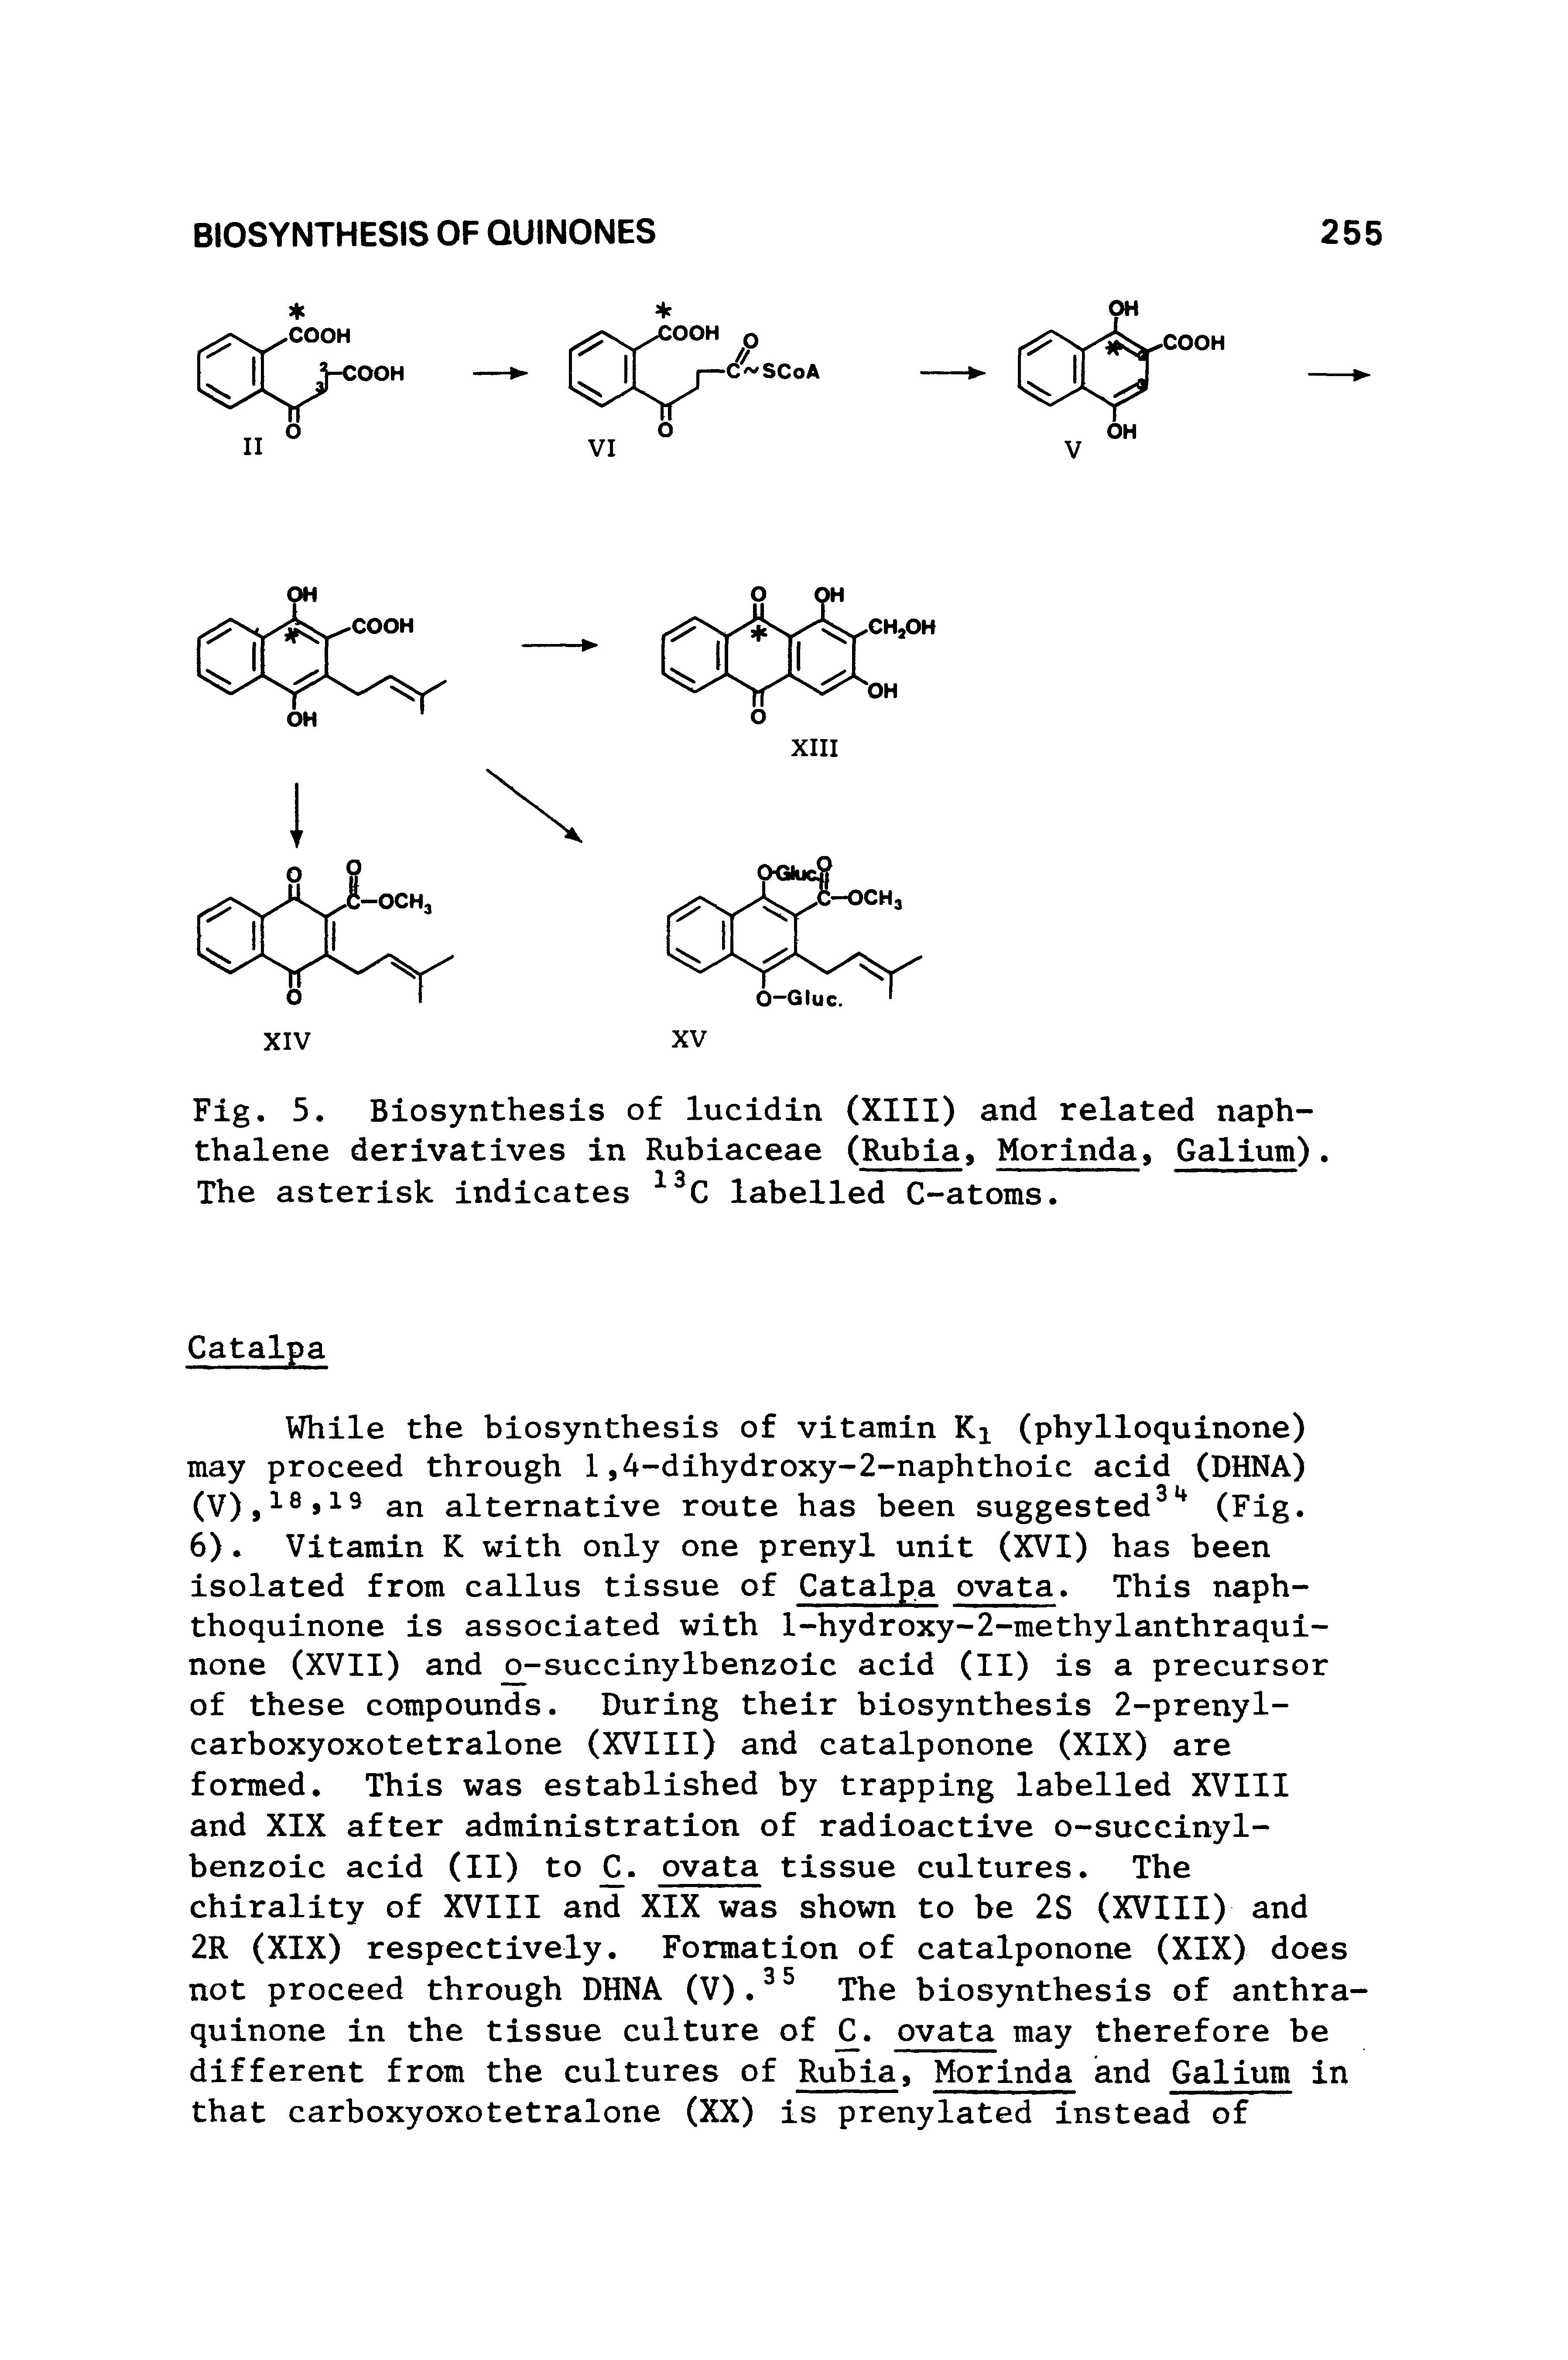 Fig. 5. Biosynthesis of lucidin (XIII) and related naphthalene derivatives in Rubiaceae (Rubia, Morinda, Galium). The asterisk indicates labelled C-atoms.